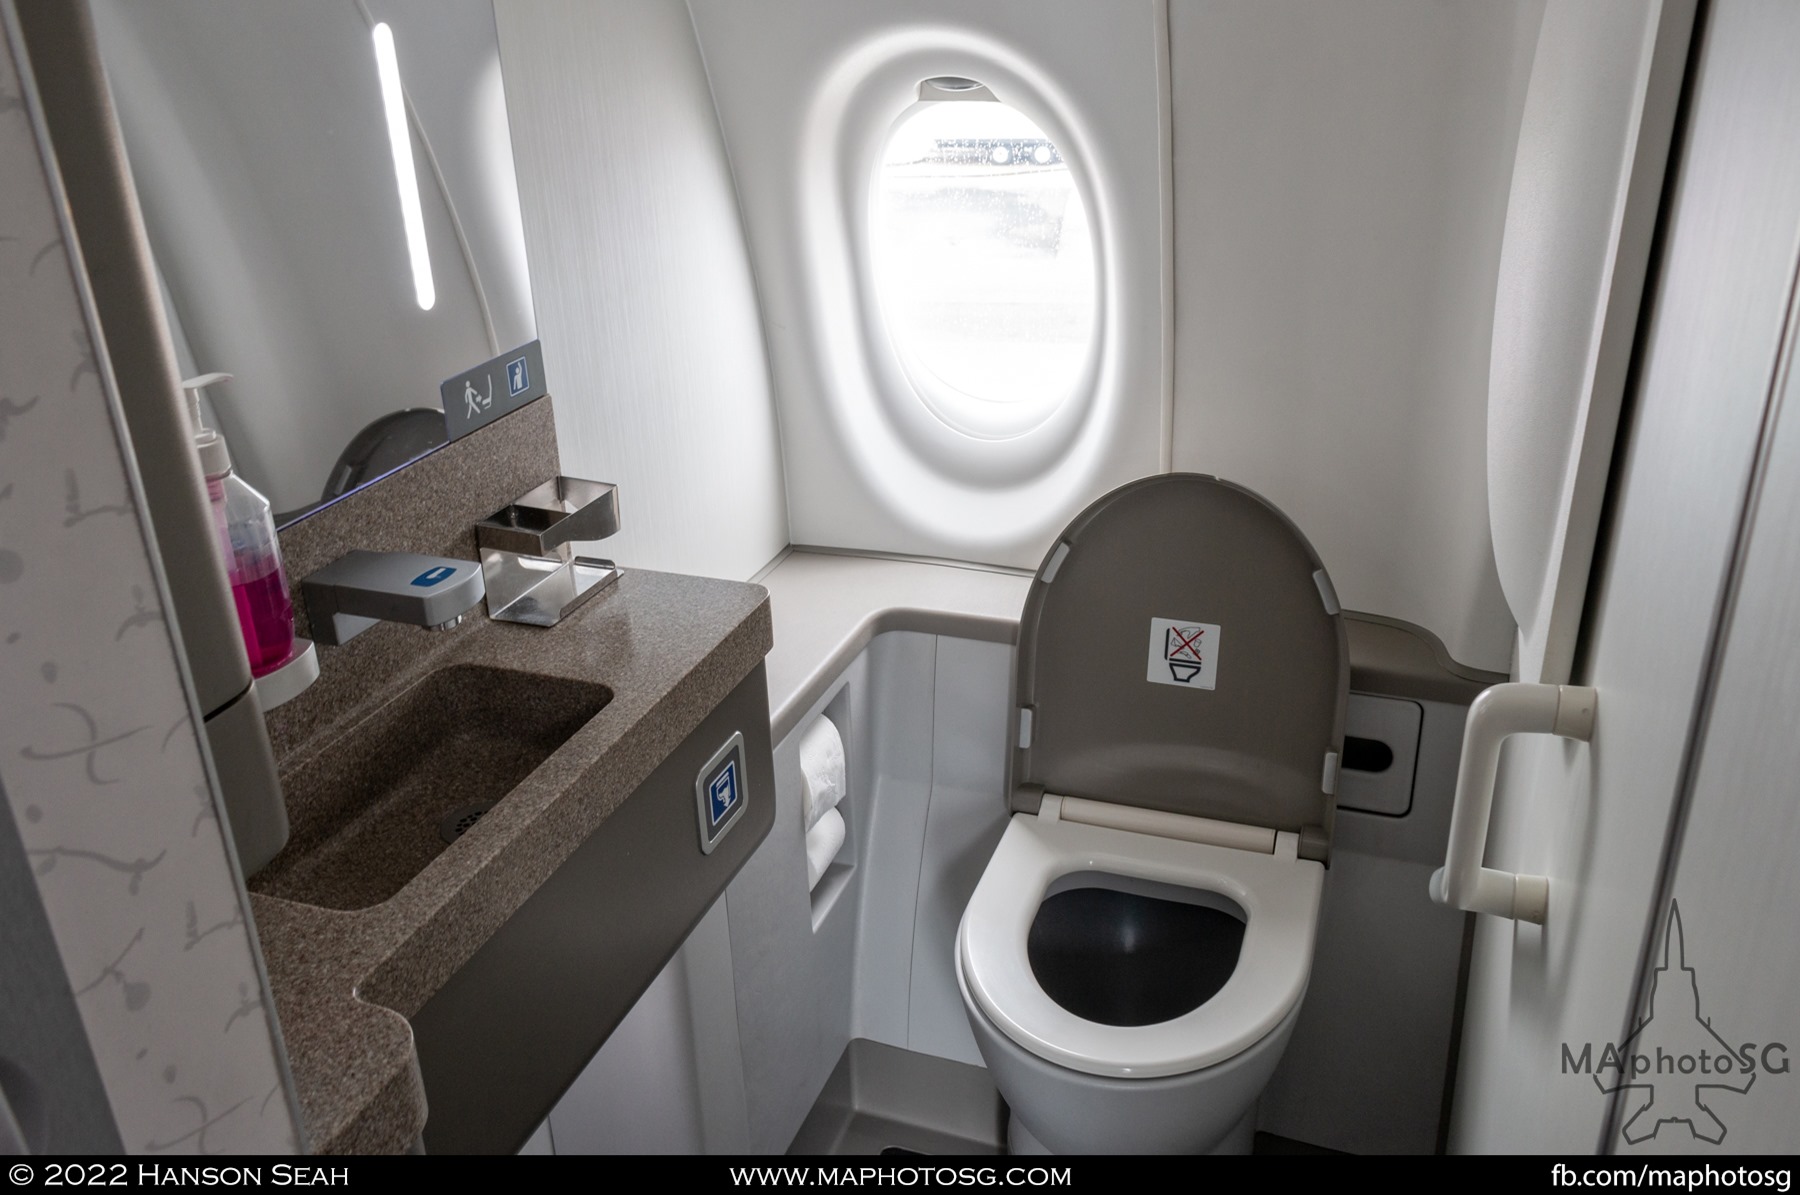 The spacious and 'Instagrammable' Lavatory of Korean Air's A220